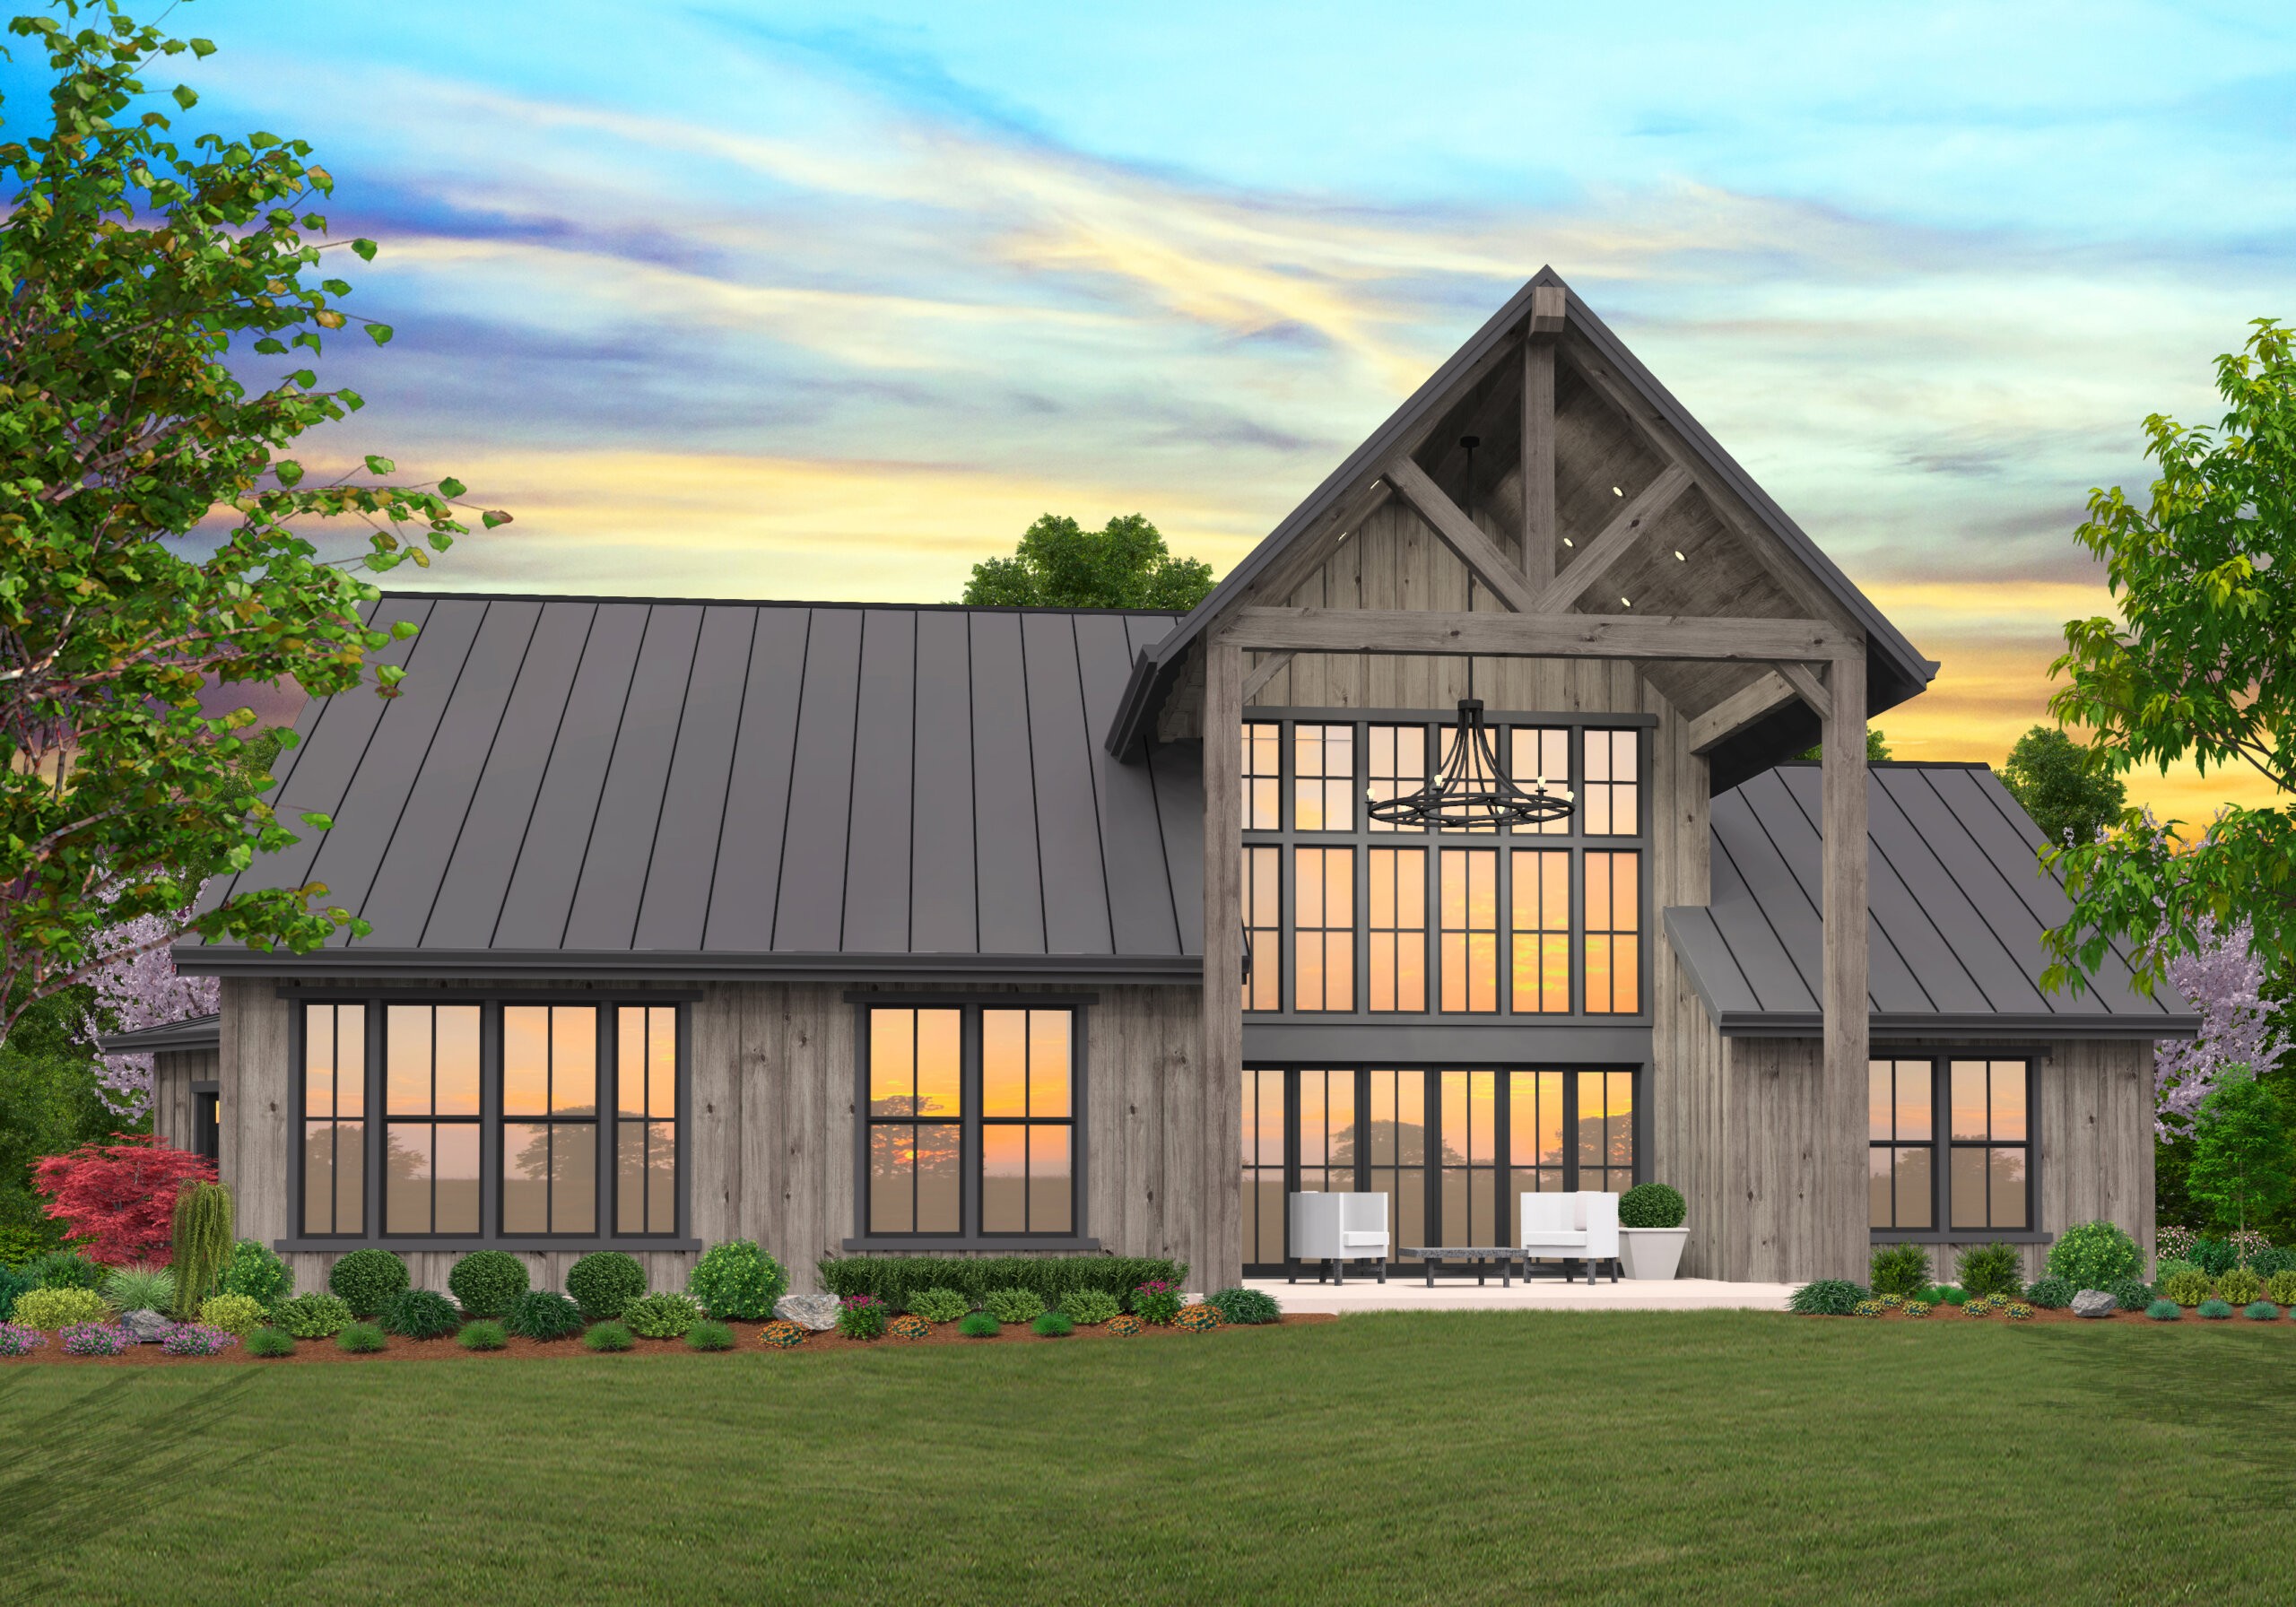 Cape May | Rustic Modern House Plan by Mark Stewart